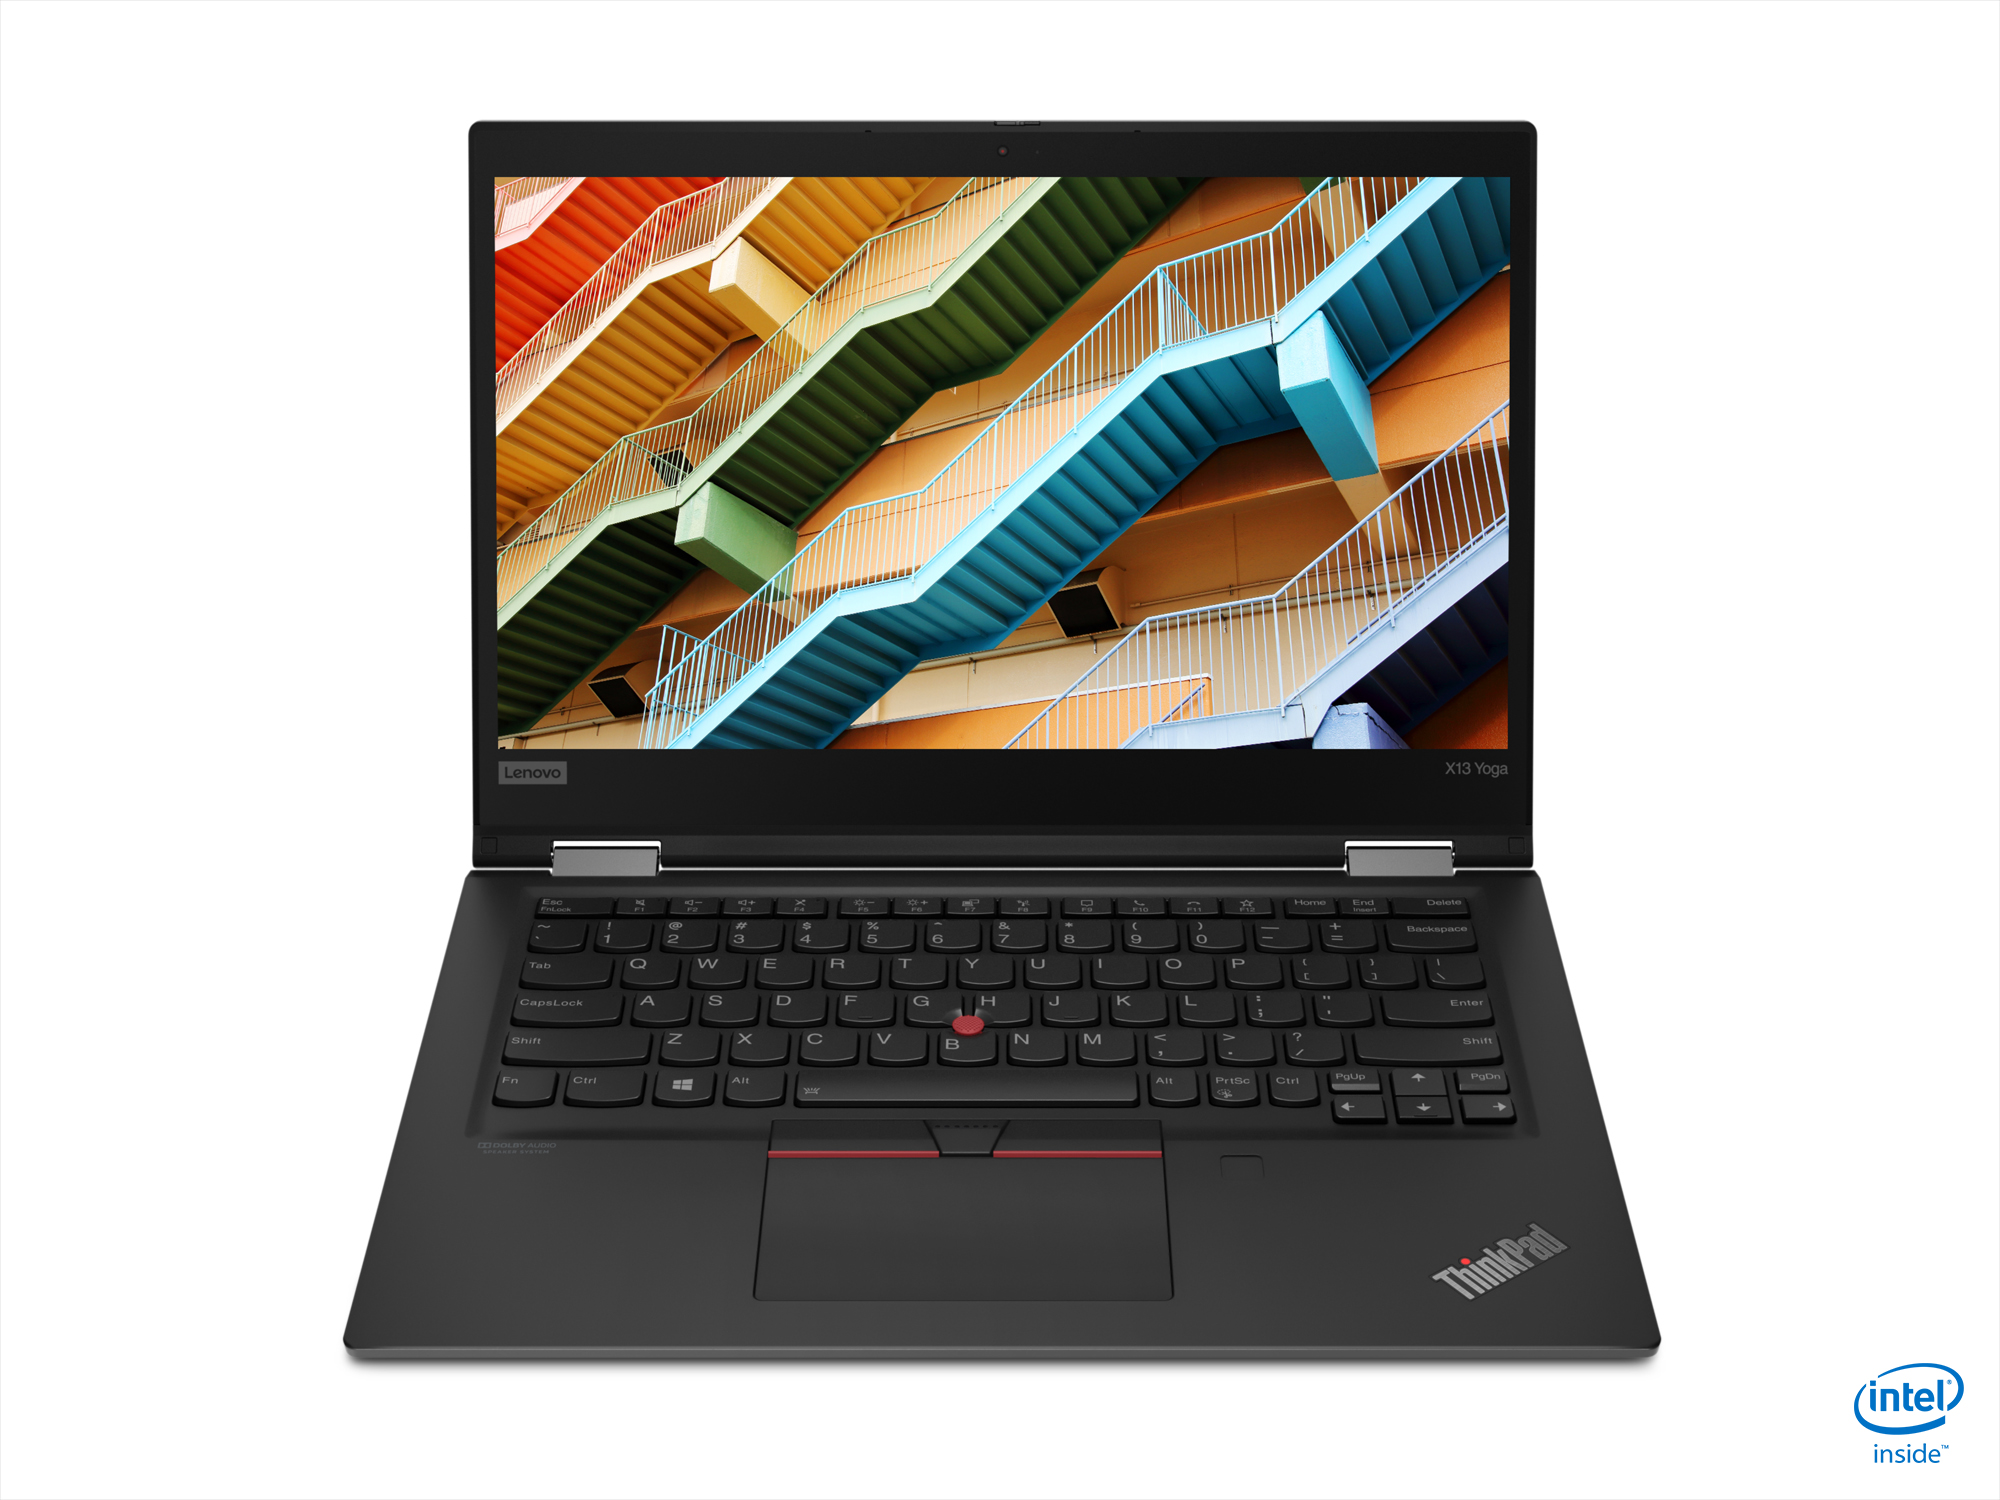 lenovo announces new thinkpad l x and t models for 2020 03 x13 yoga black hero front facing jd  copy